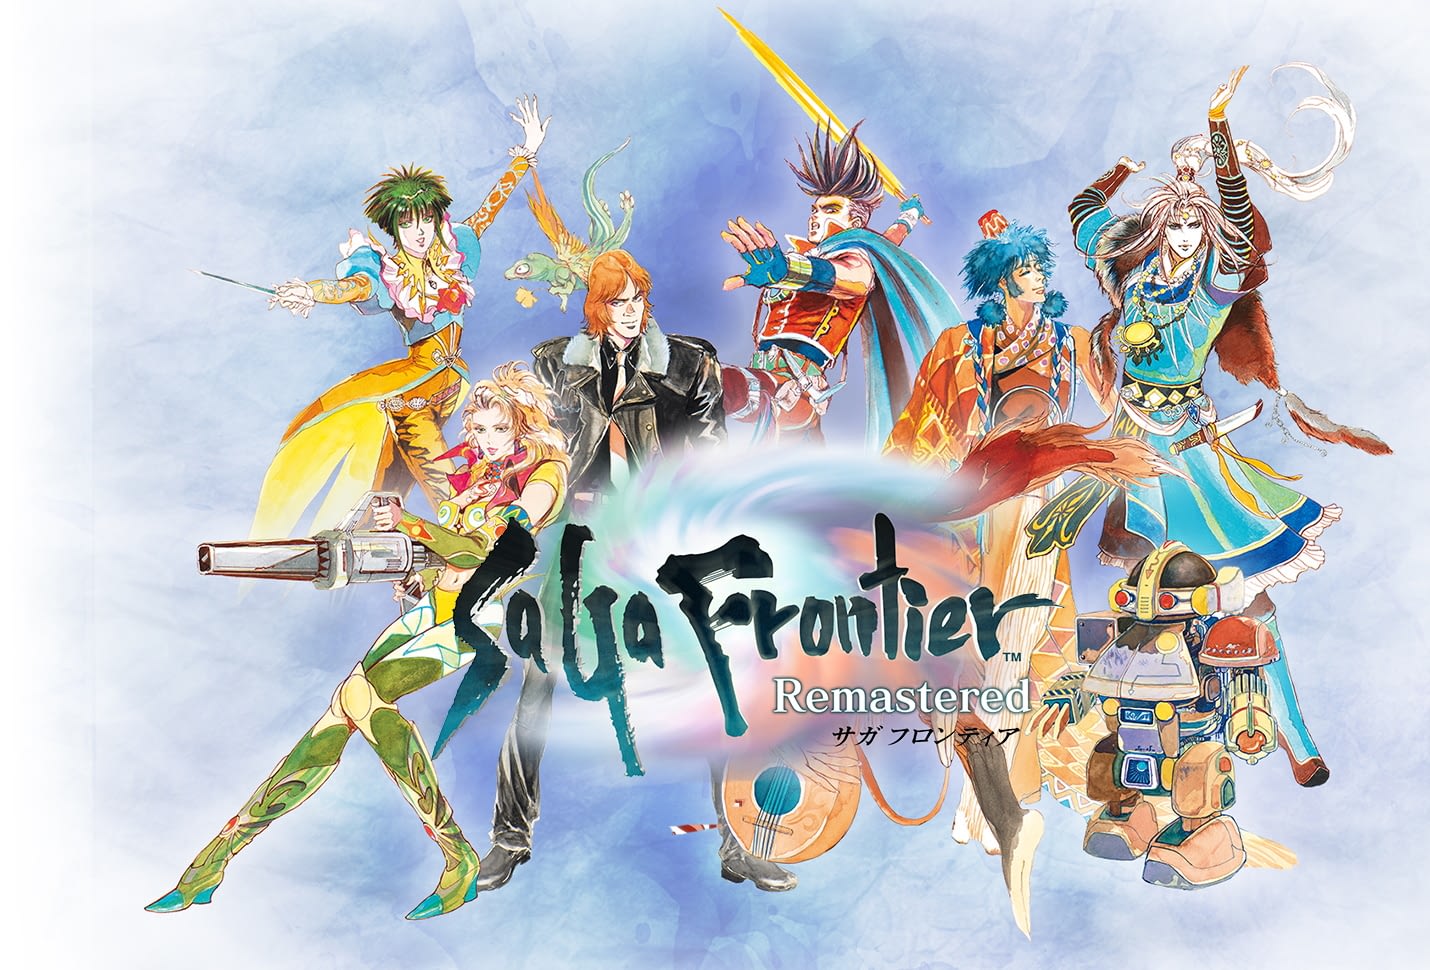 SaGa Frontier Remastered game release